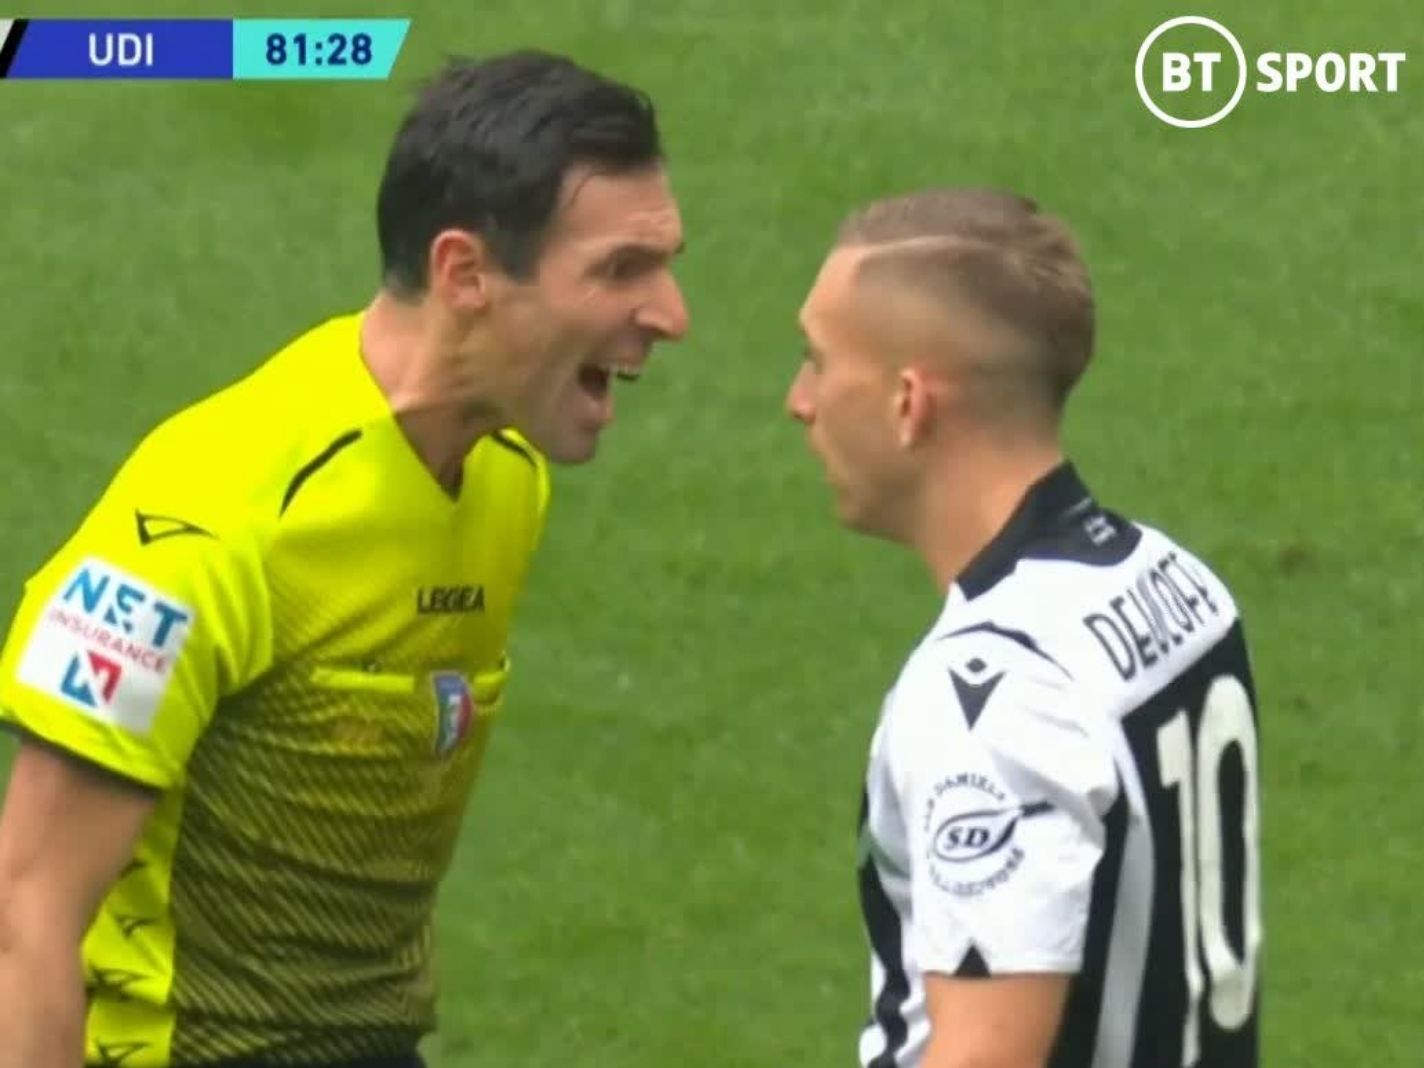 Italian referee asserts authority with severe tongue-lashing at a protesting Serie A player